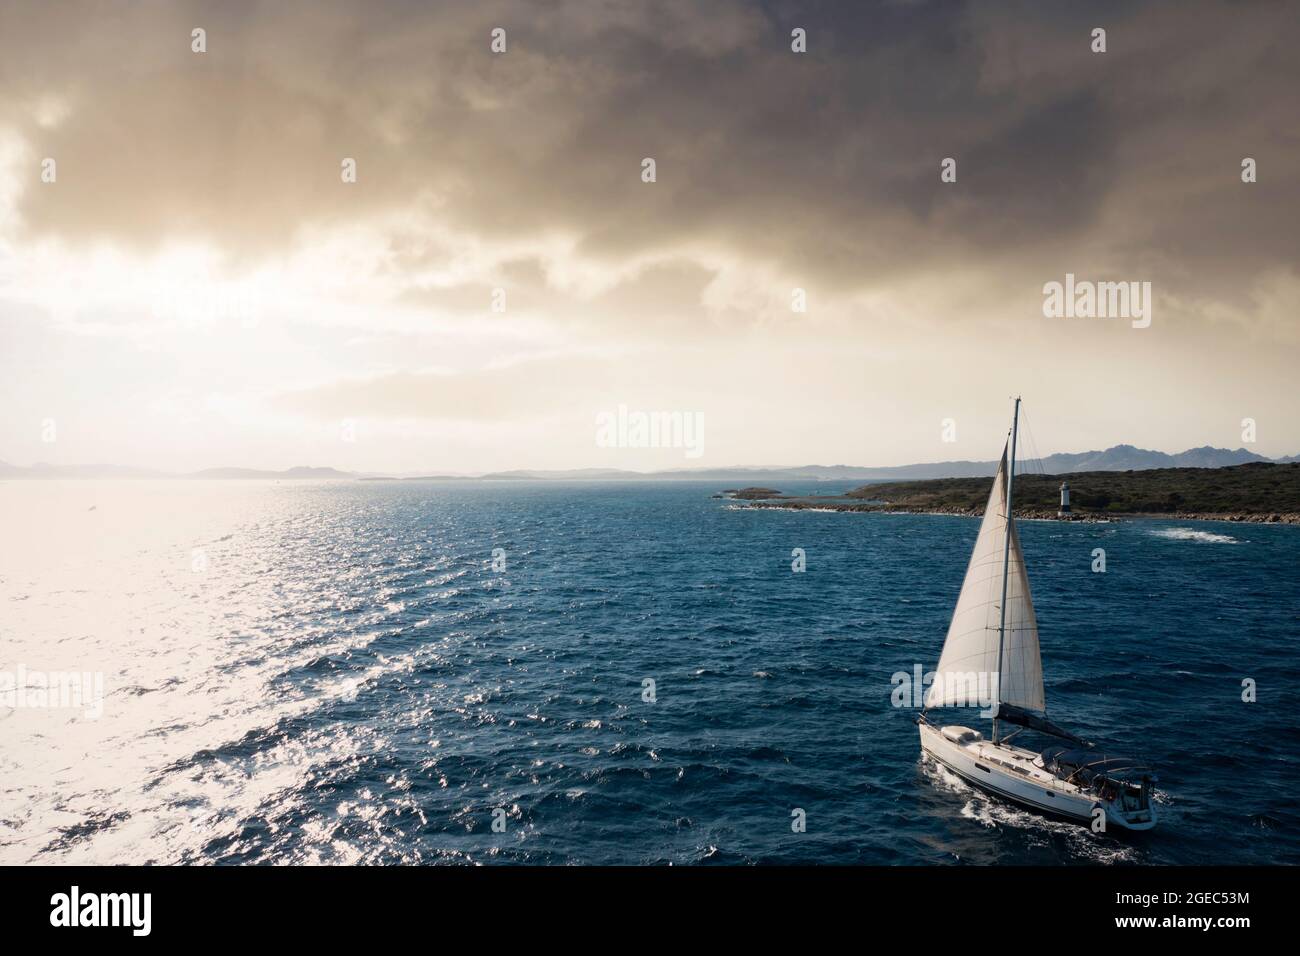 View from above, stunning aerial view of a sailboat sailing on a blue water during a beautiful and dramatic sunset. Costa Smeralda, Sardinia, Italy. Stock Photo